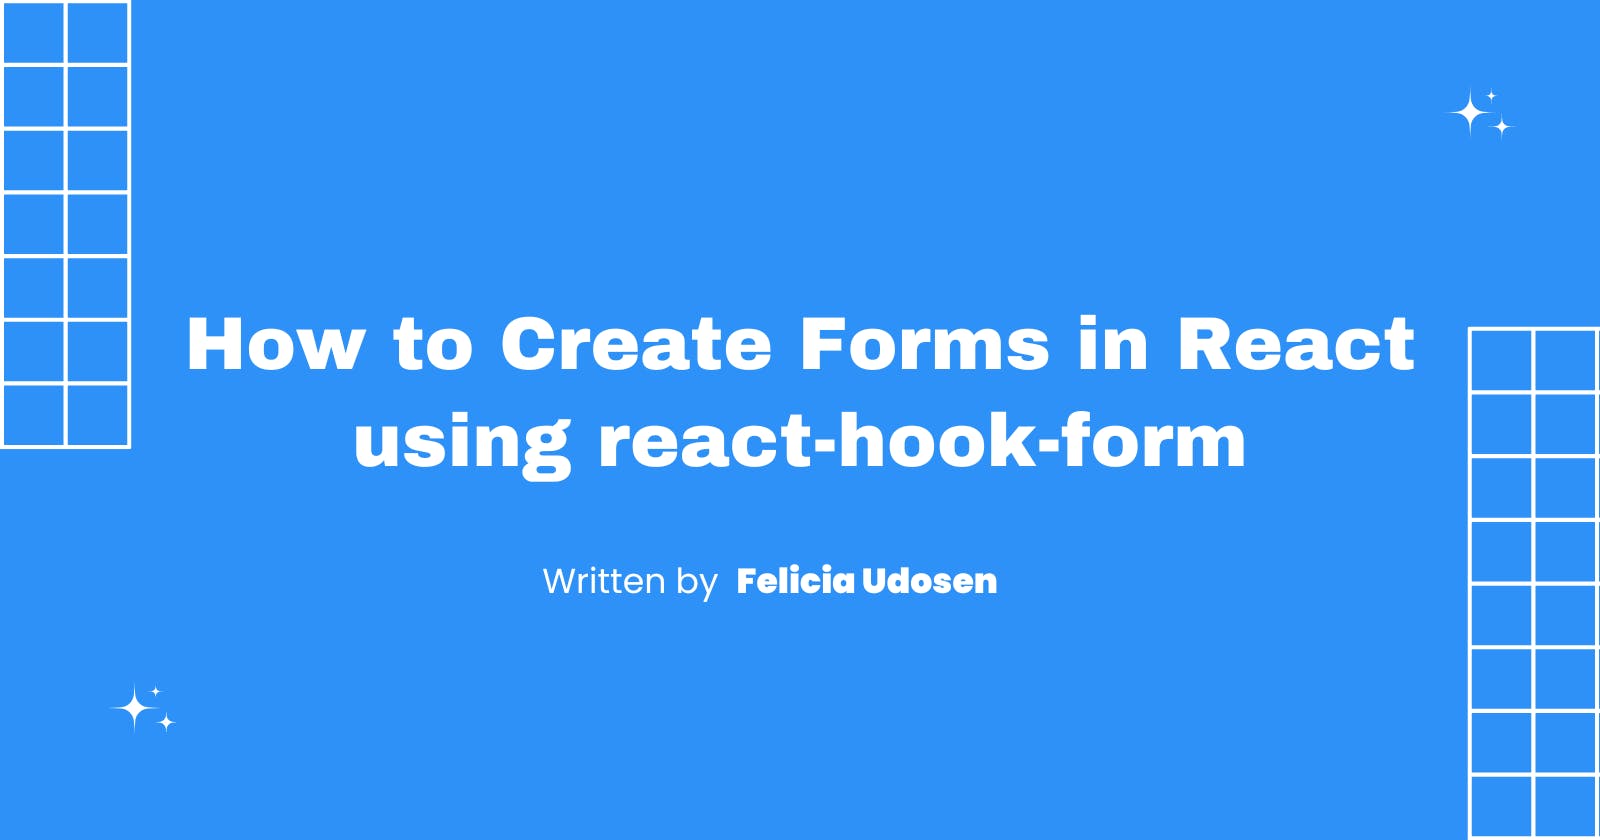 How to Create Forms in React using react-hook-form